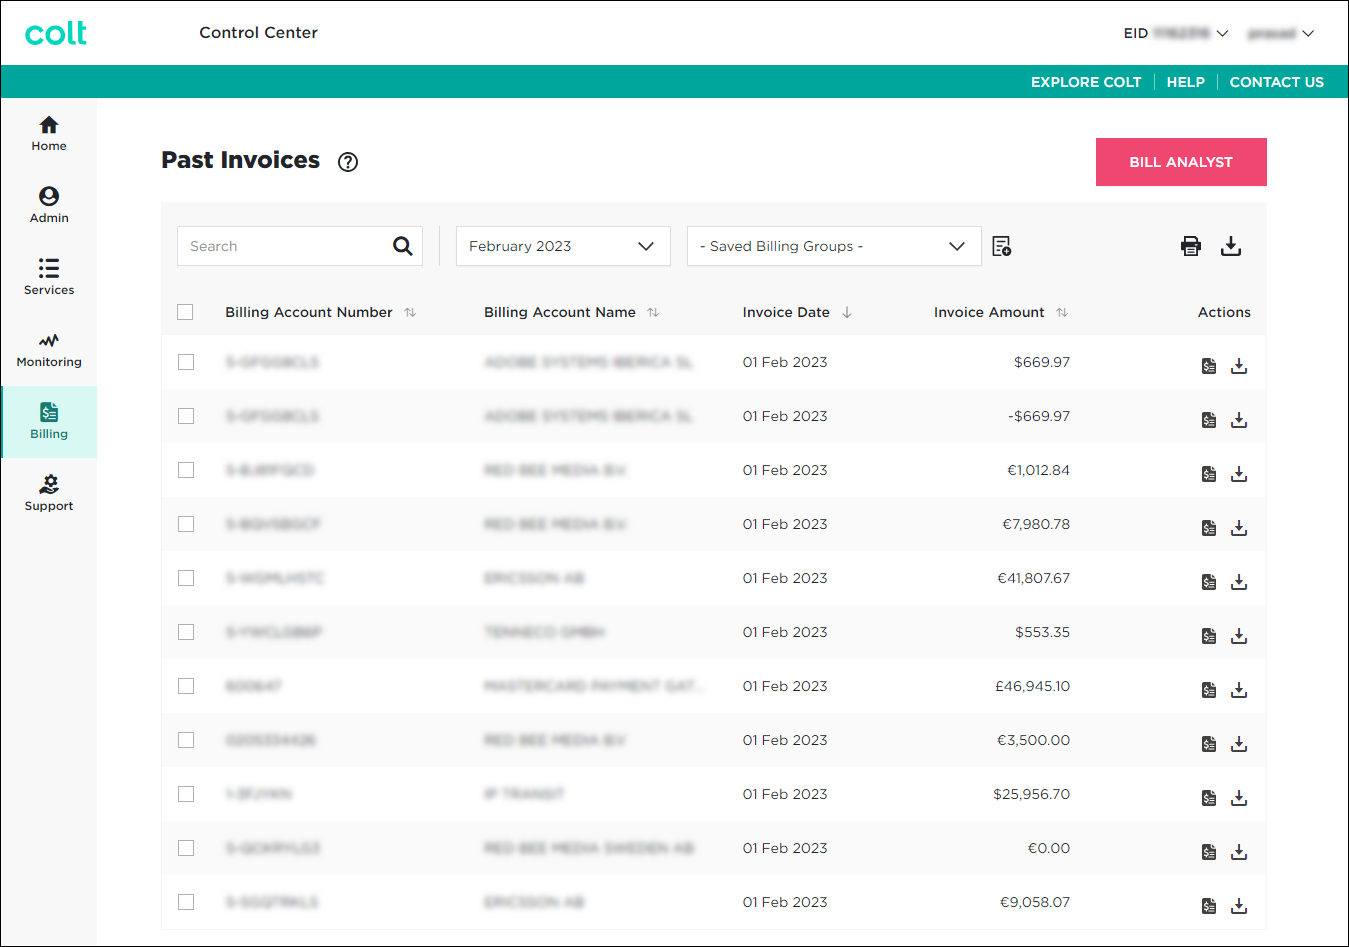 Past Invoices & Downloads (showing Past Invoices tab)